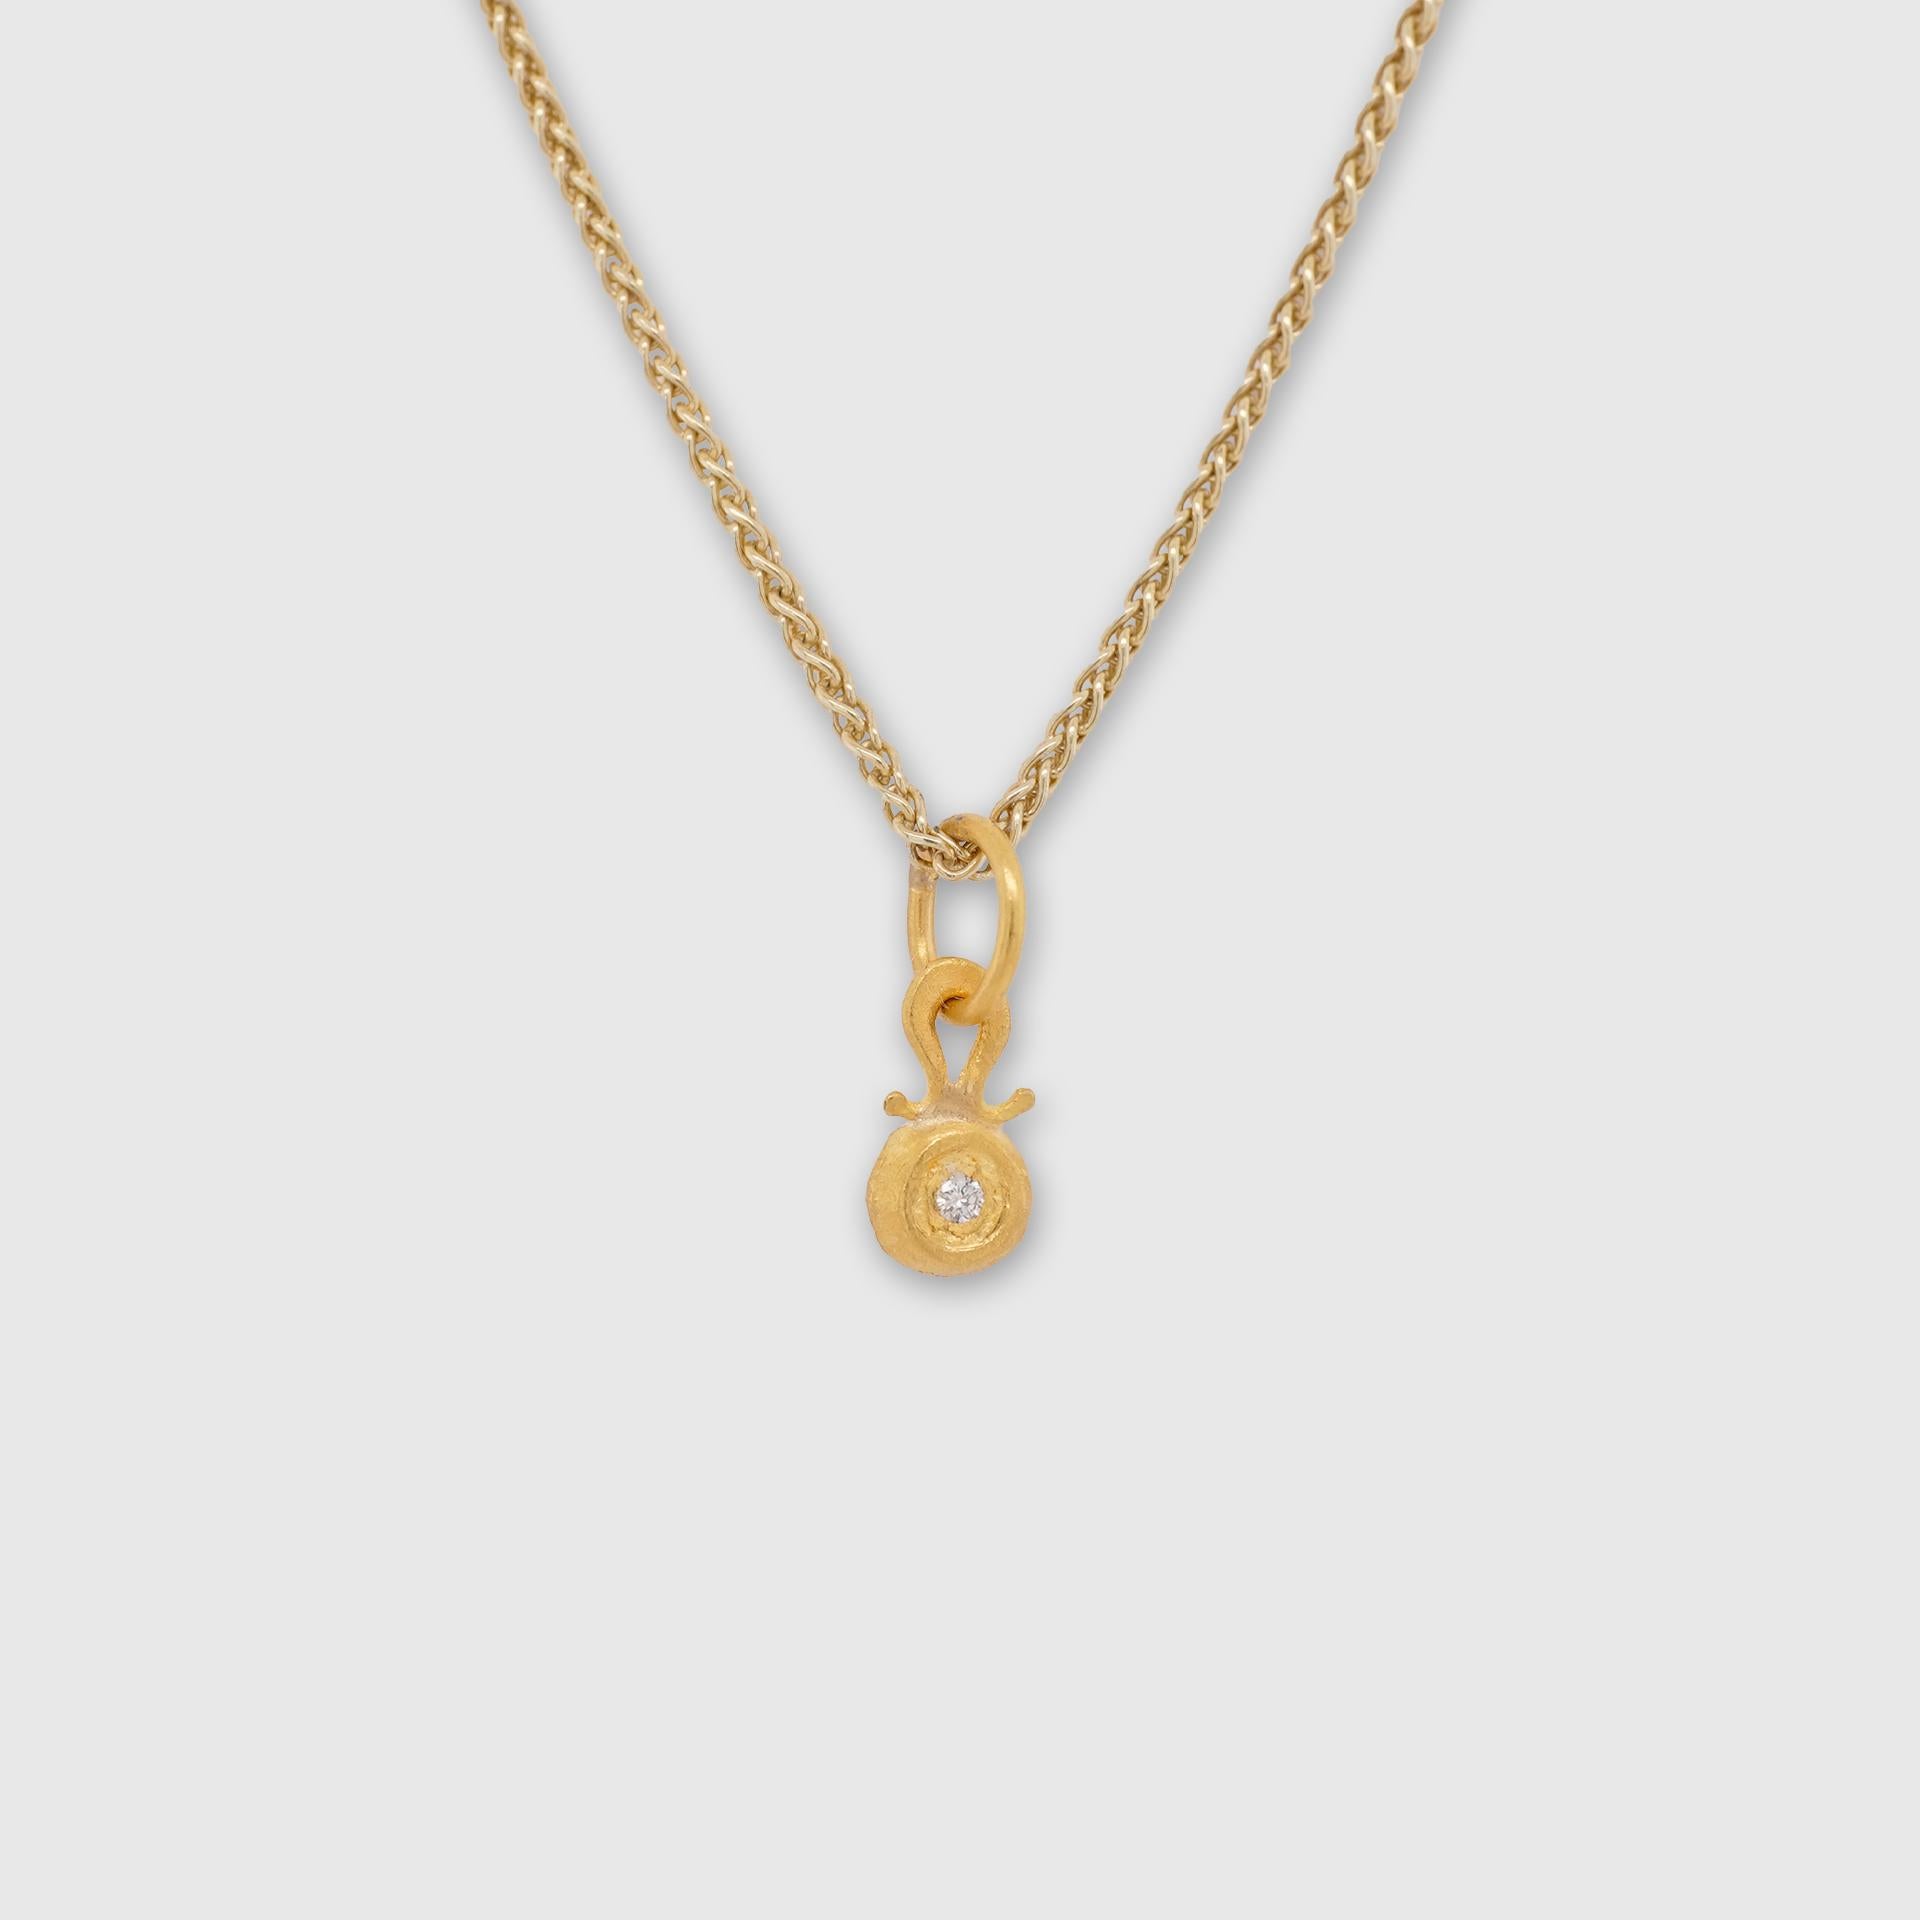 Mini Diamond Layering Charm, 24kt Yellow Gold and 0.03ct Diamonds
Size - Very Small Charm (Looks great paired and layered with other charm pendants)
6 Diamonds - 0.03cts
24kt Gold - 0.80 grams